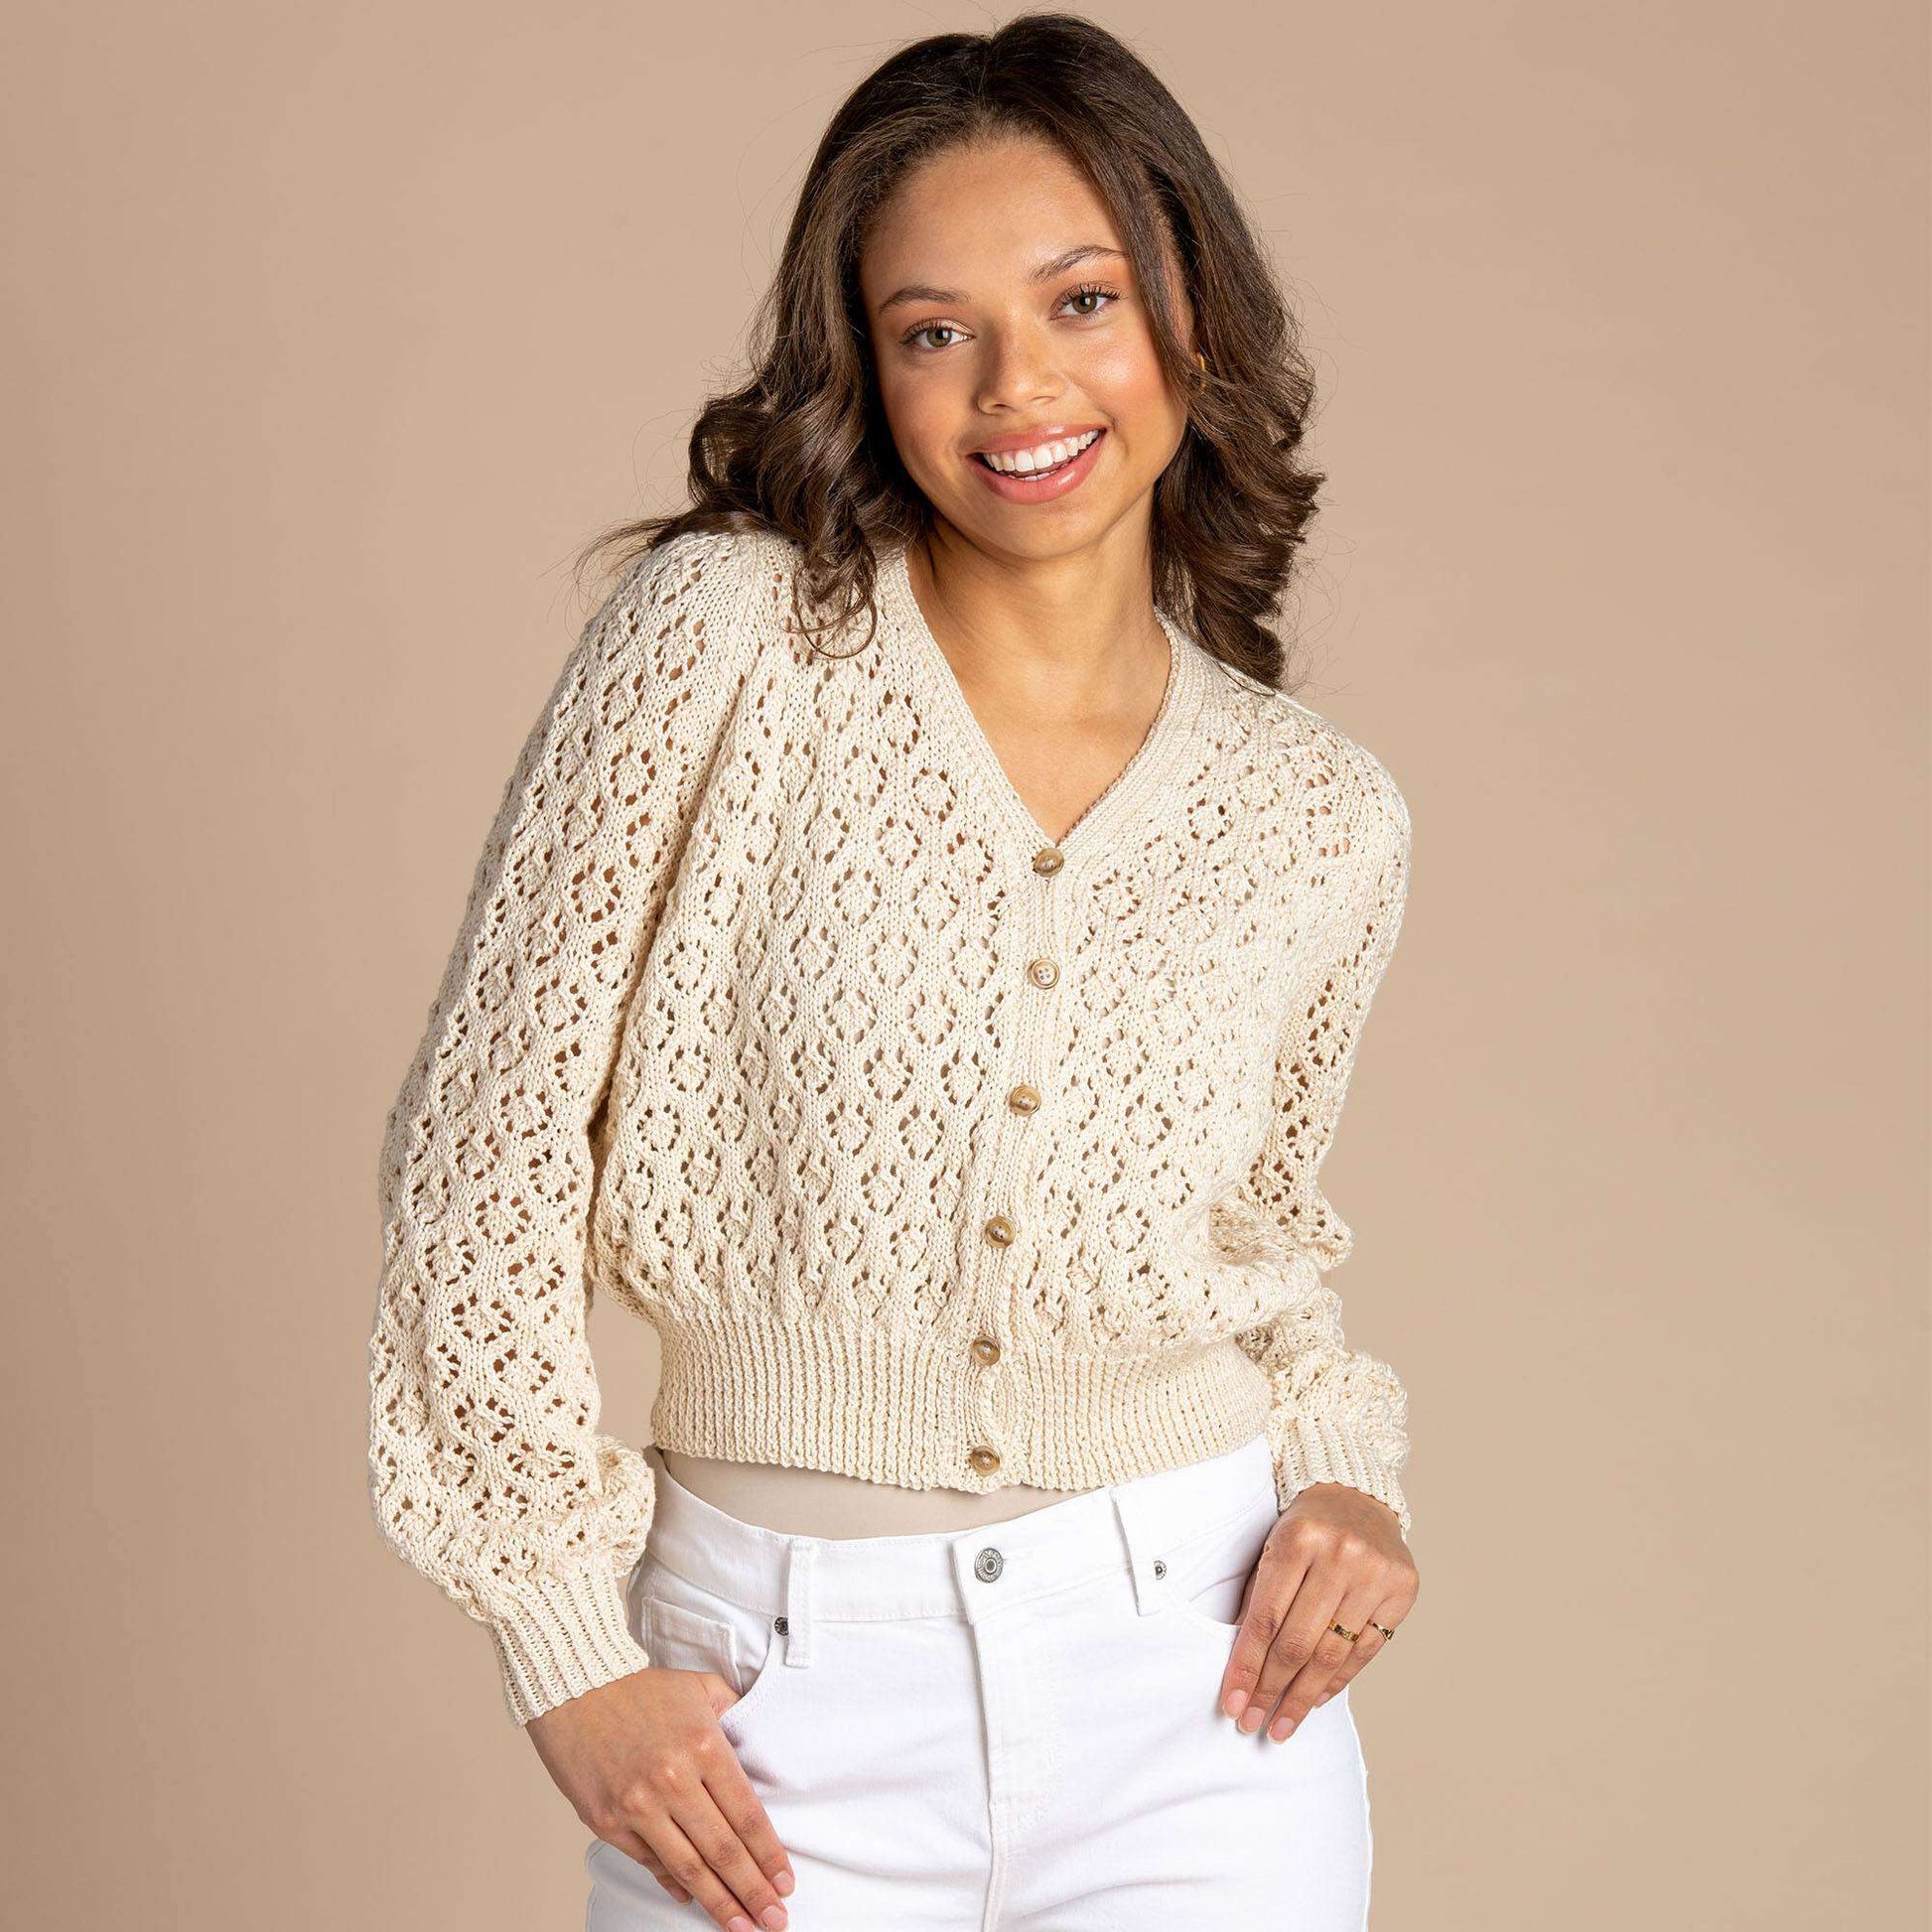 Cool Breeze - Knitted Cropped Cardigan for Women